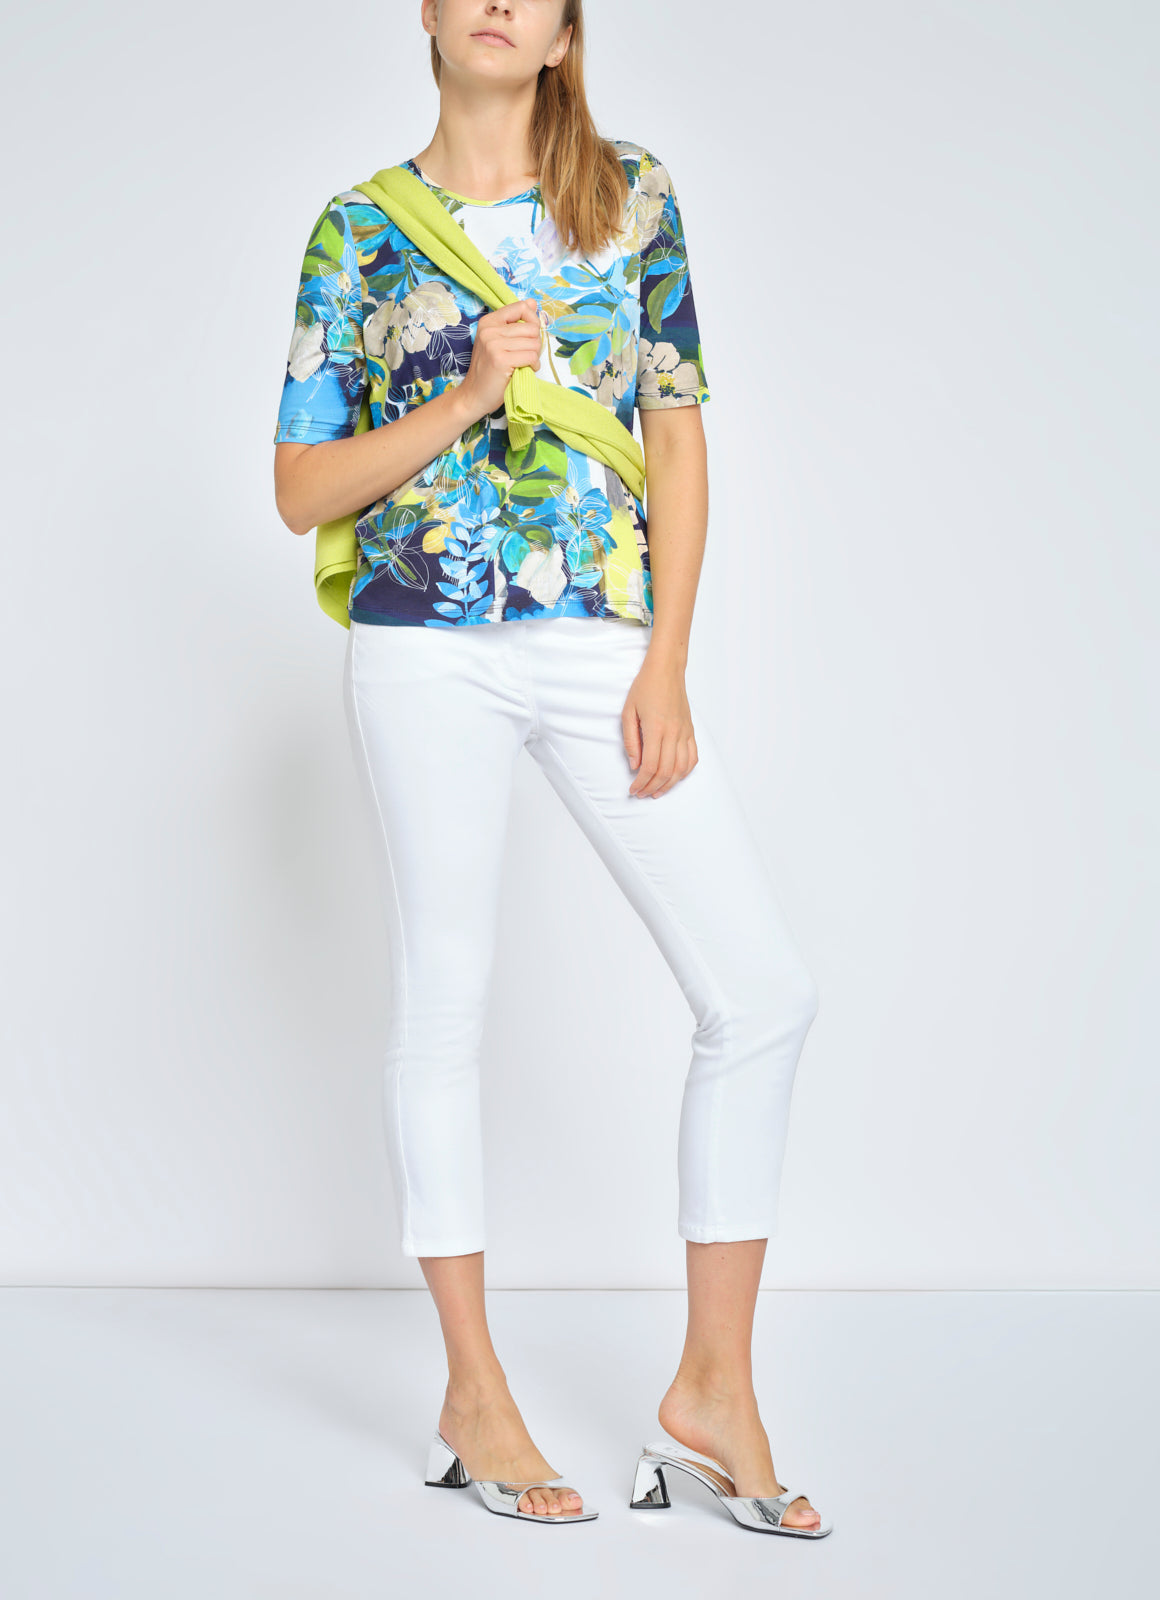 Froral Print Multicolour T-Shirt with 1/2 sleeves